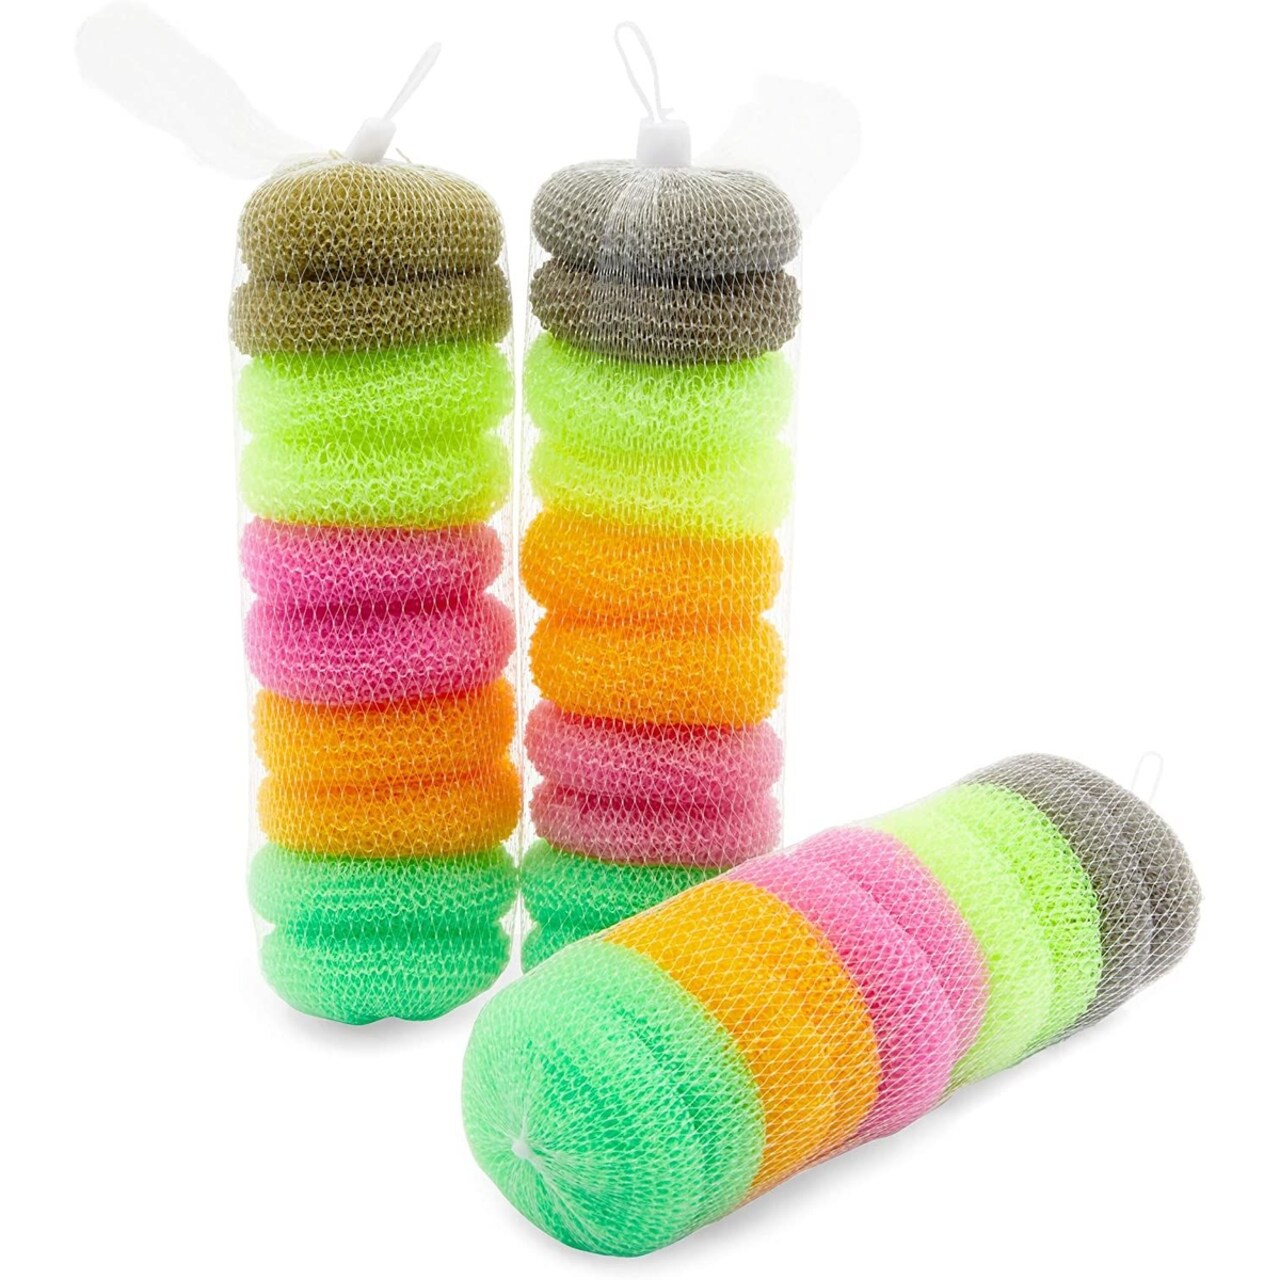 Scrubber Sponges for Washing Dishes, Colorful Dish Sponges (3 x 1